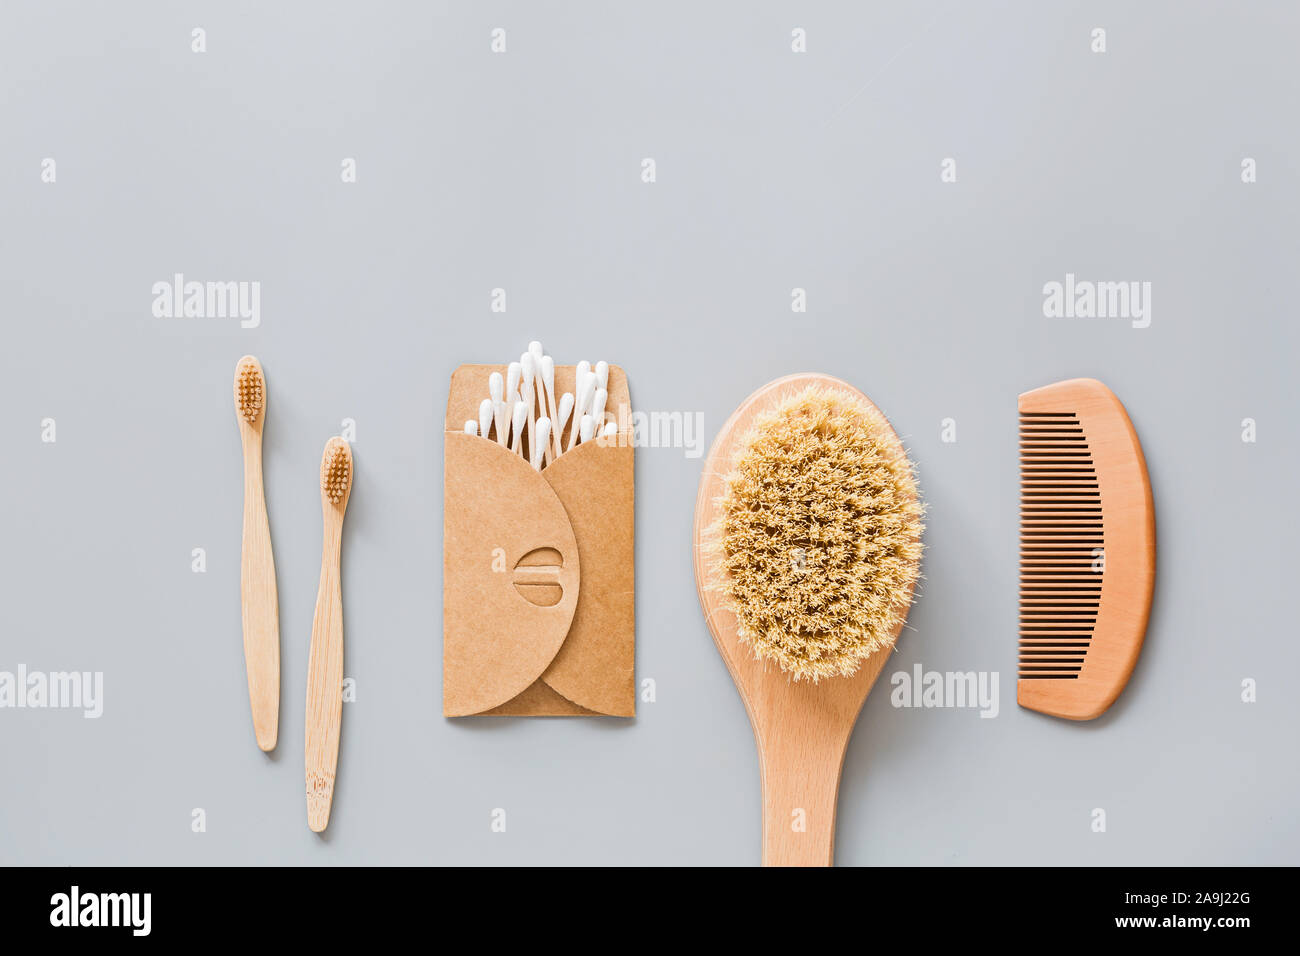 Download Natural Bathroom Accessories Wooden Comb Bamboo Toothbrush Massage Brush Ear Sticks On Gray Paper Background Zero Waste Products Mockup Flat Stock Photo Alamy